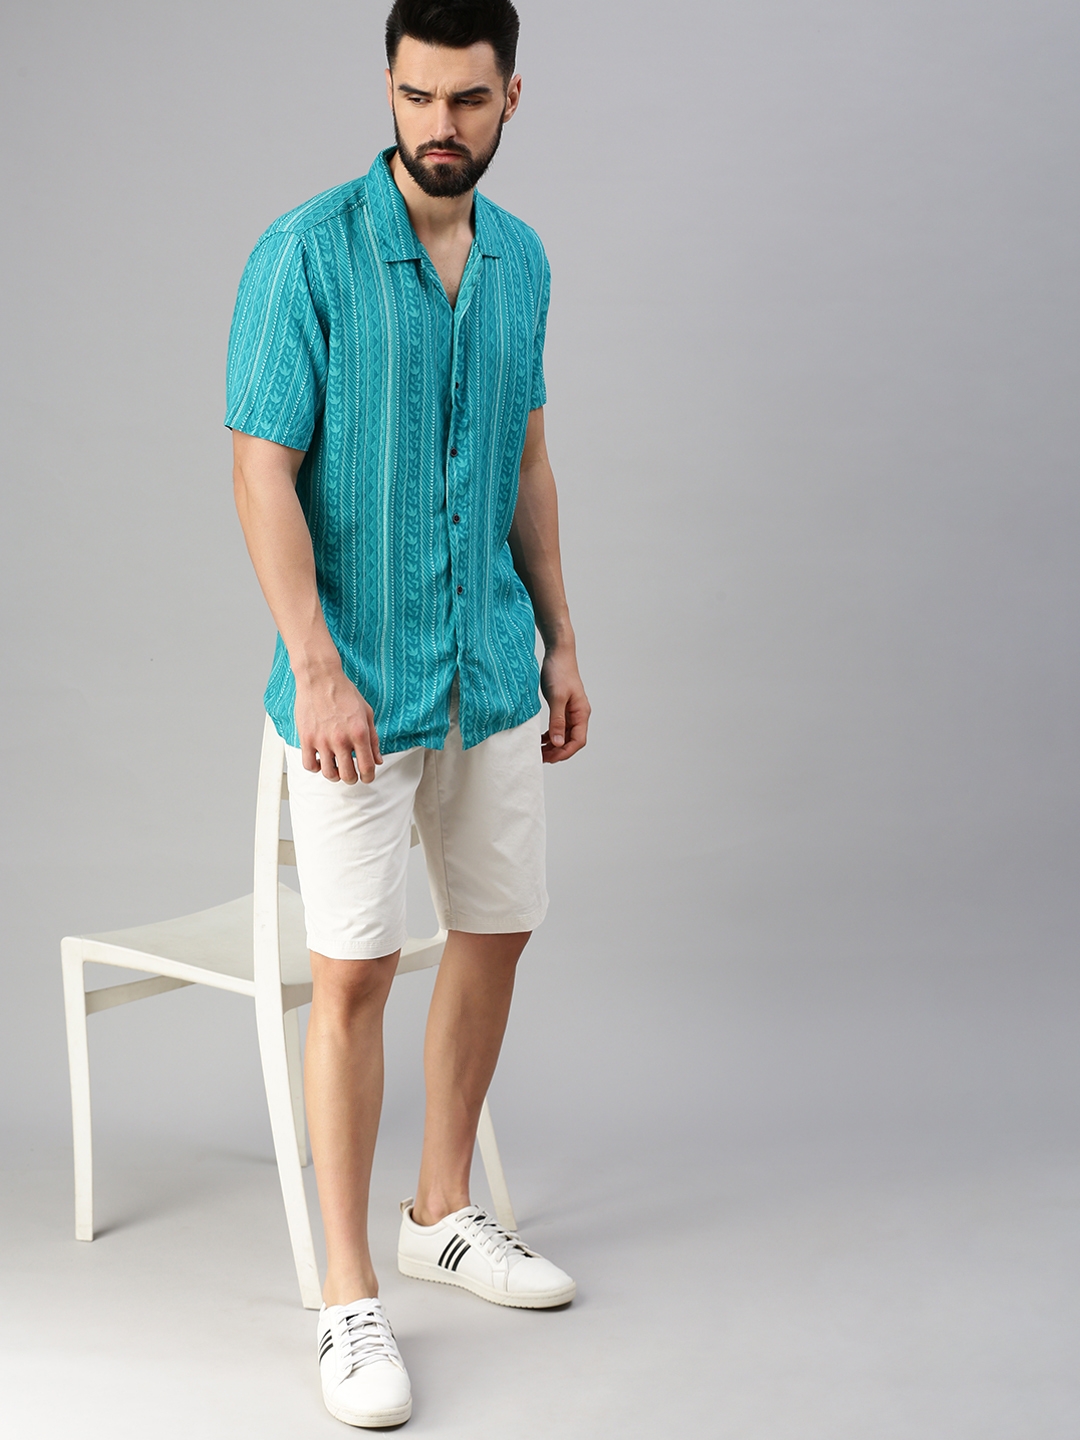 Showoff | SHOWOFF Men's Regular Sleeves Turquoise Blue Abstract Shirt 4